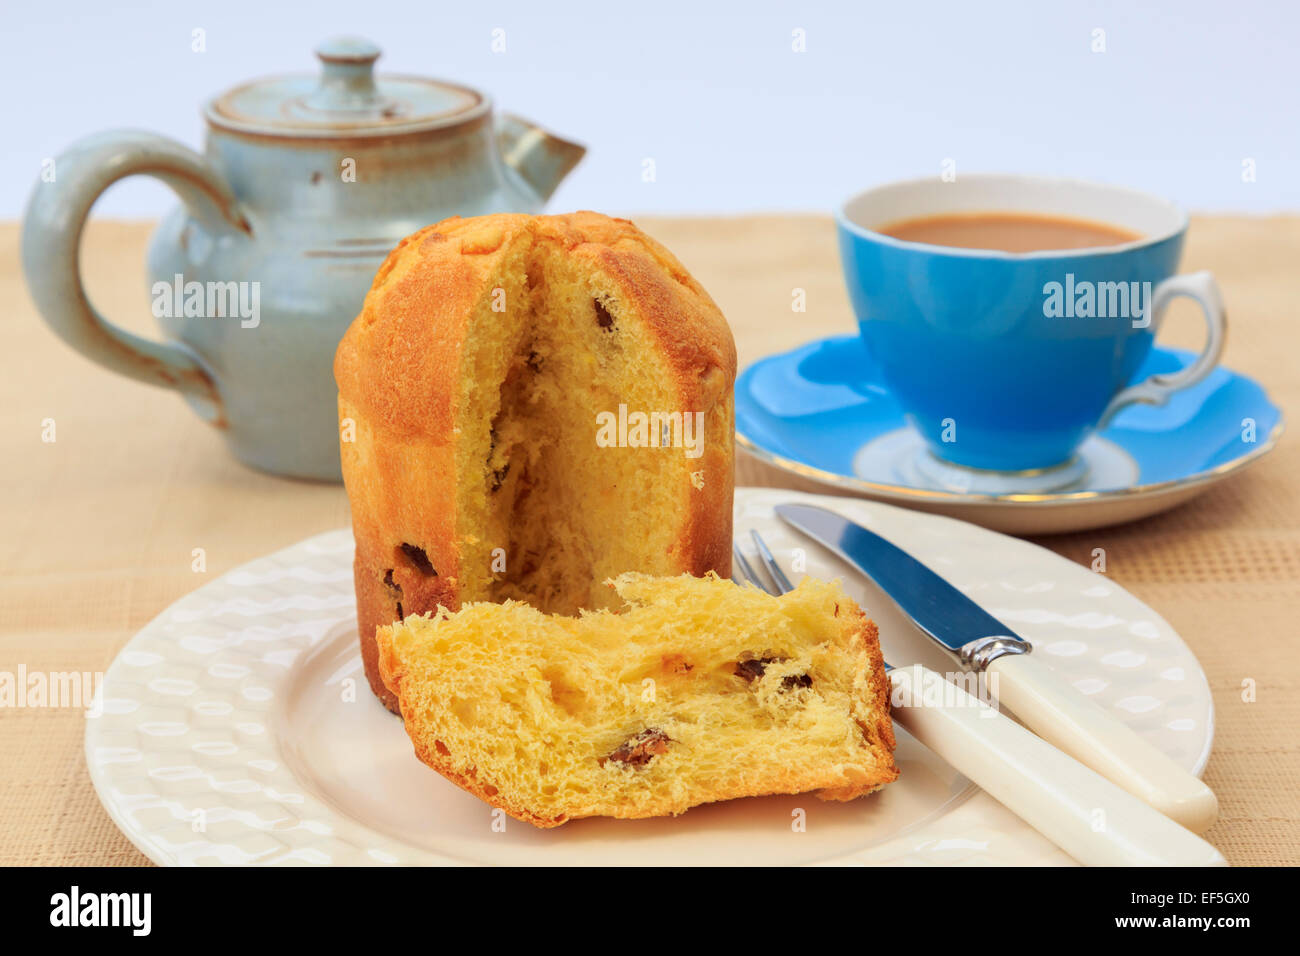 A slice of Panettone Italian Christmas fruit bread cake on a plate with a cup of tea and teapot on a table for afternoon tea. UK Stock Photo